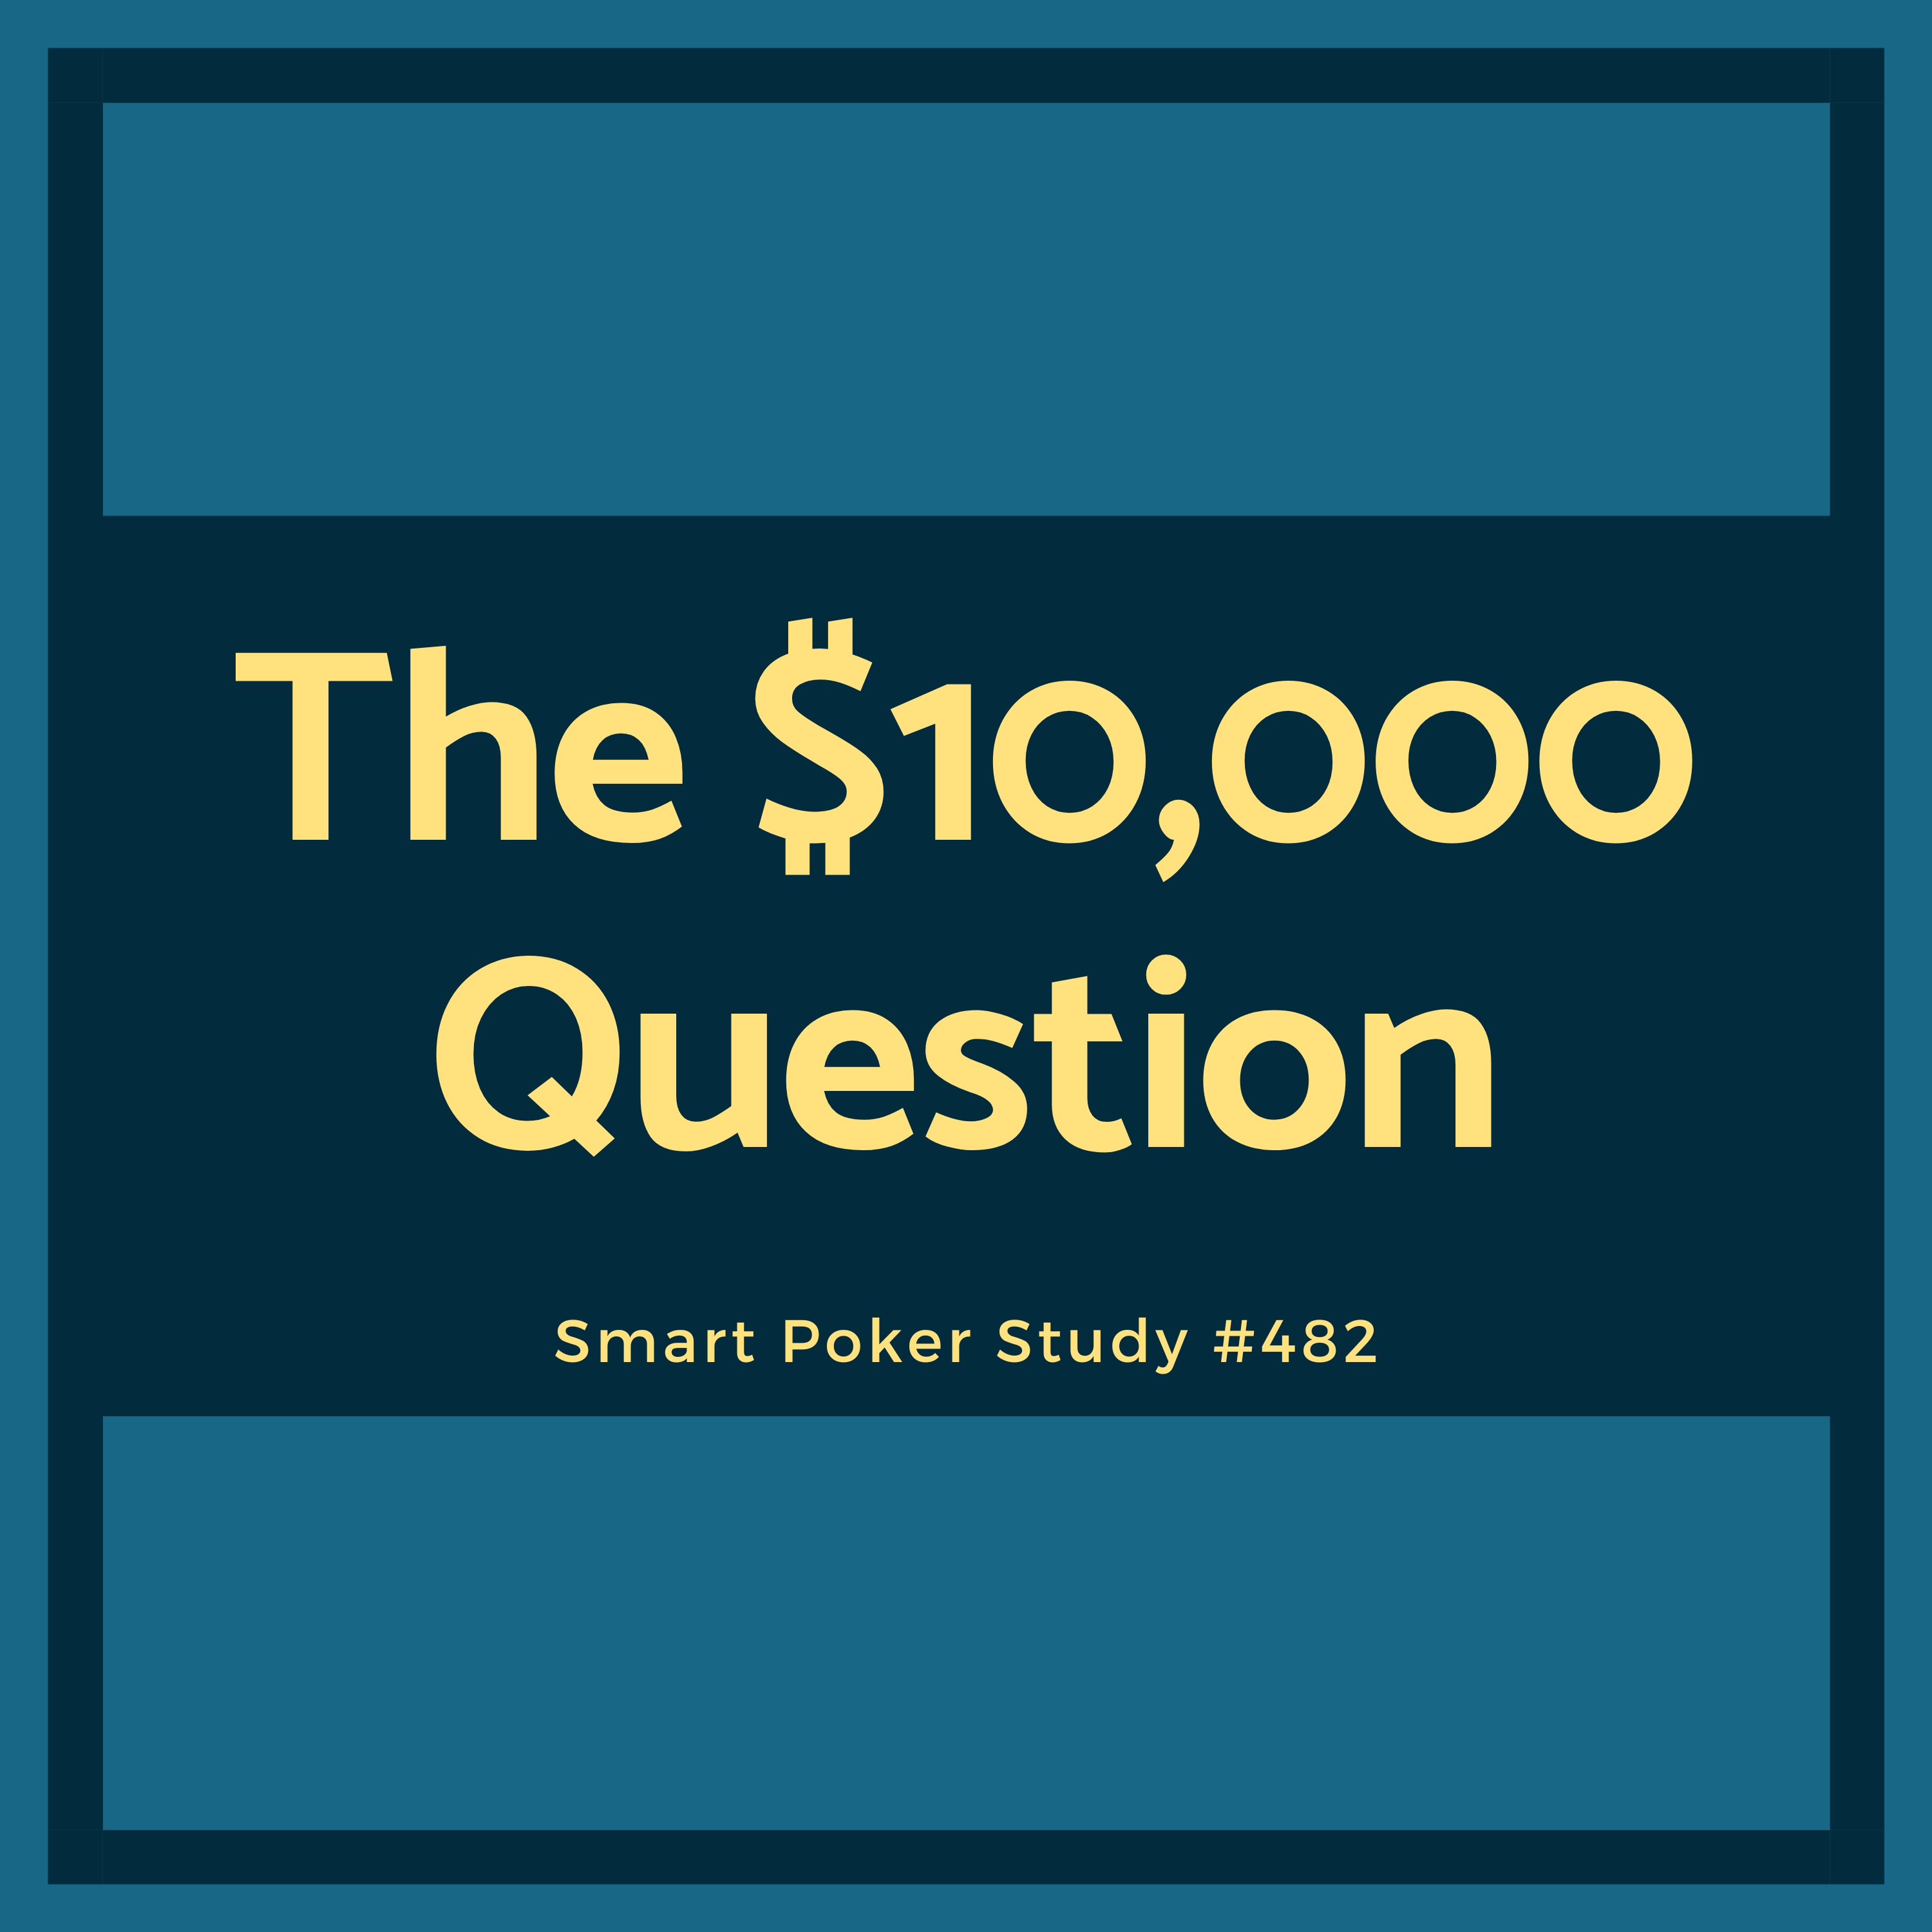 Motivate Your Poker Studies With The $10,000 Question #482